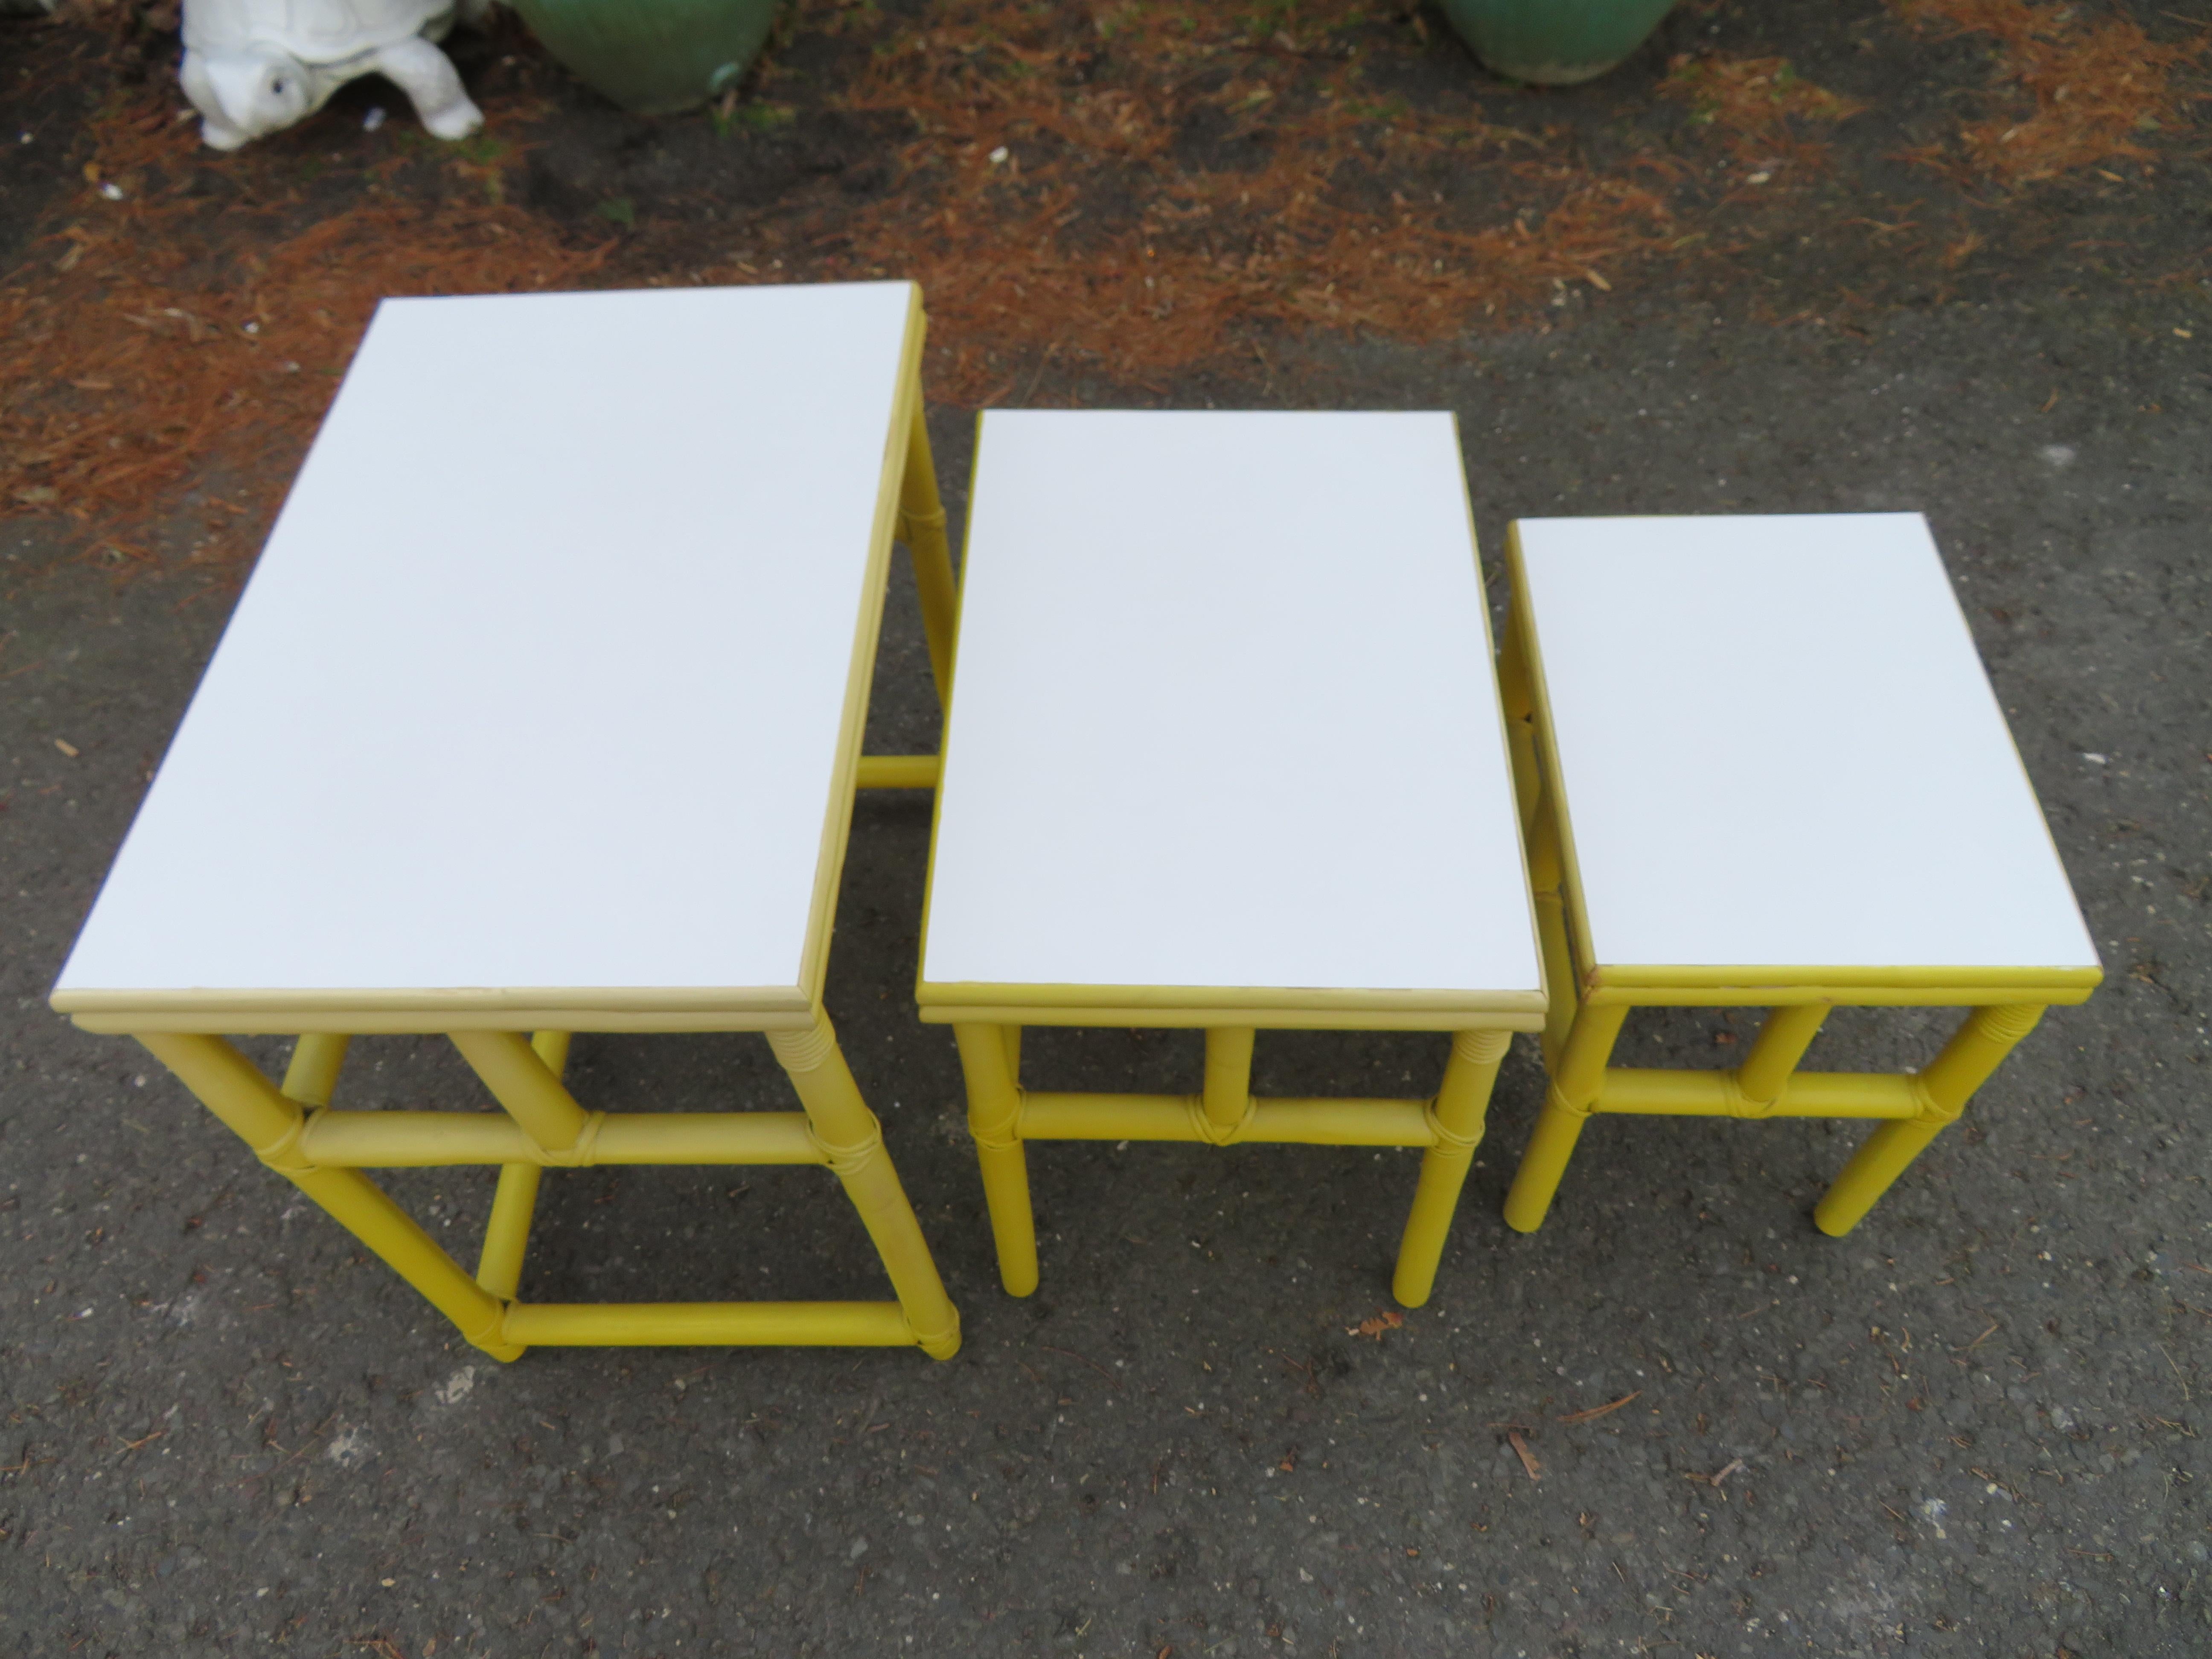 Darling set of 3 yellow rattan nesting tables with white Formica tops. We love these used in a covered porch or a Florida sunroom. The tops of each have a wonderful white Formica which is very durable and easy to care for. They measure 24.5